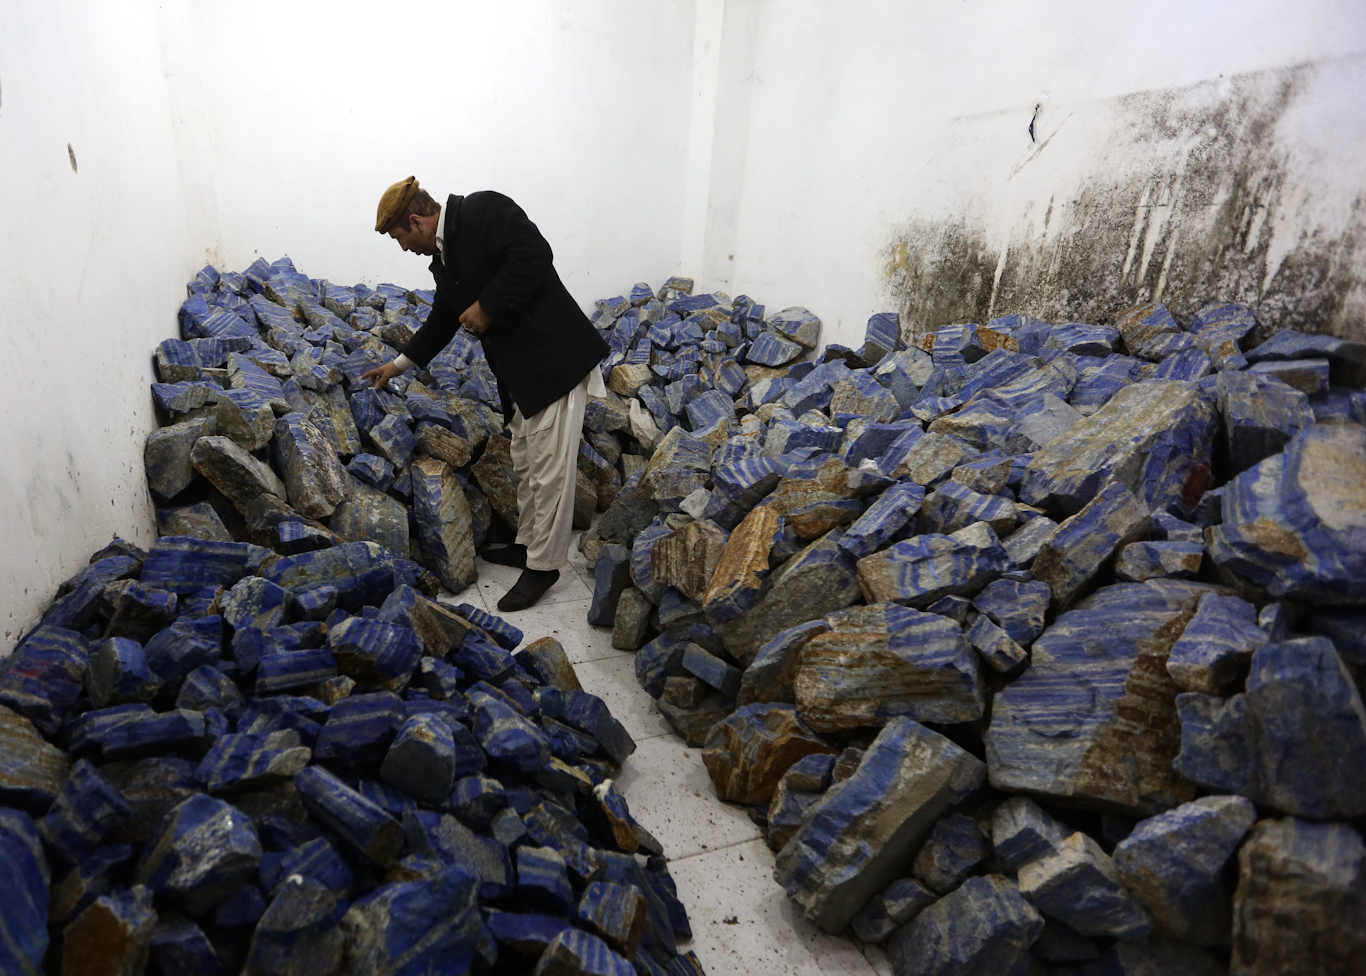 An Afghan businessman checks lapis lazuli, a key part of the country’s extensive mineral wealth, at his shop in the city of Kabul. Rahmat Gul | AP